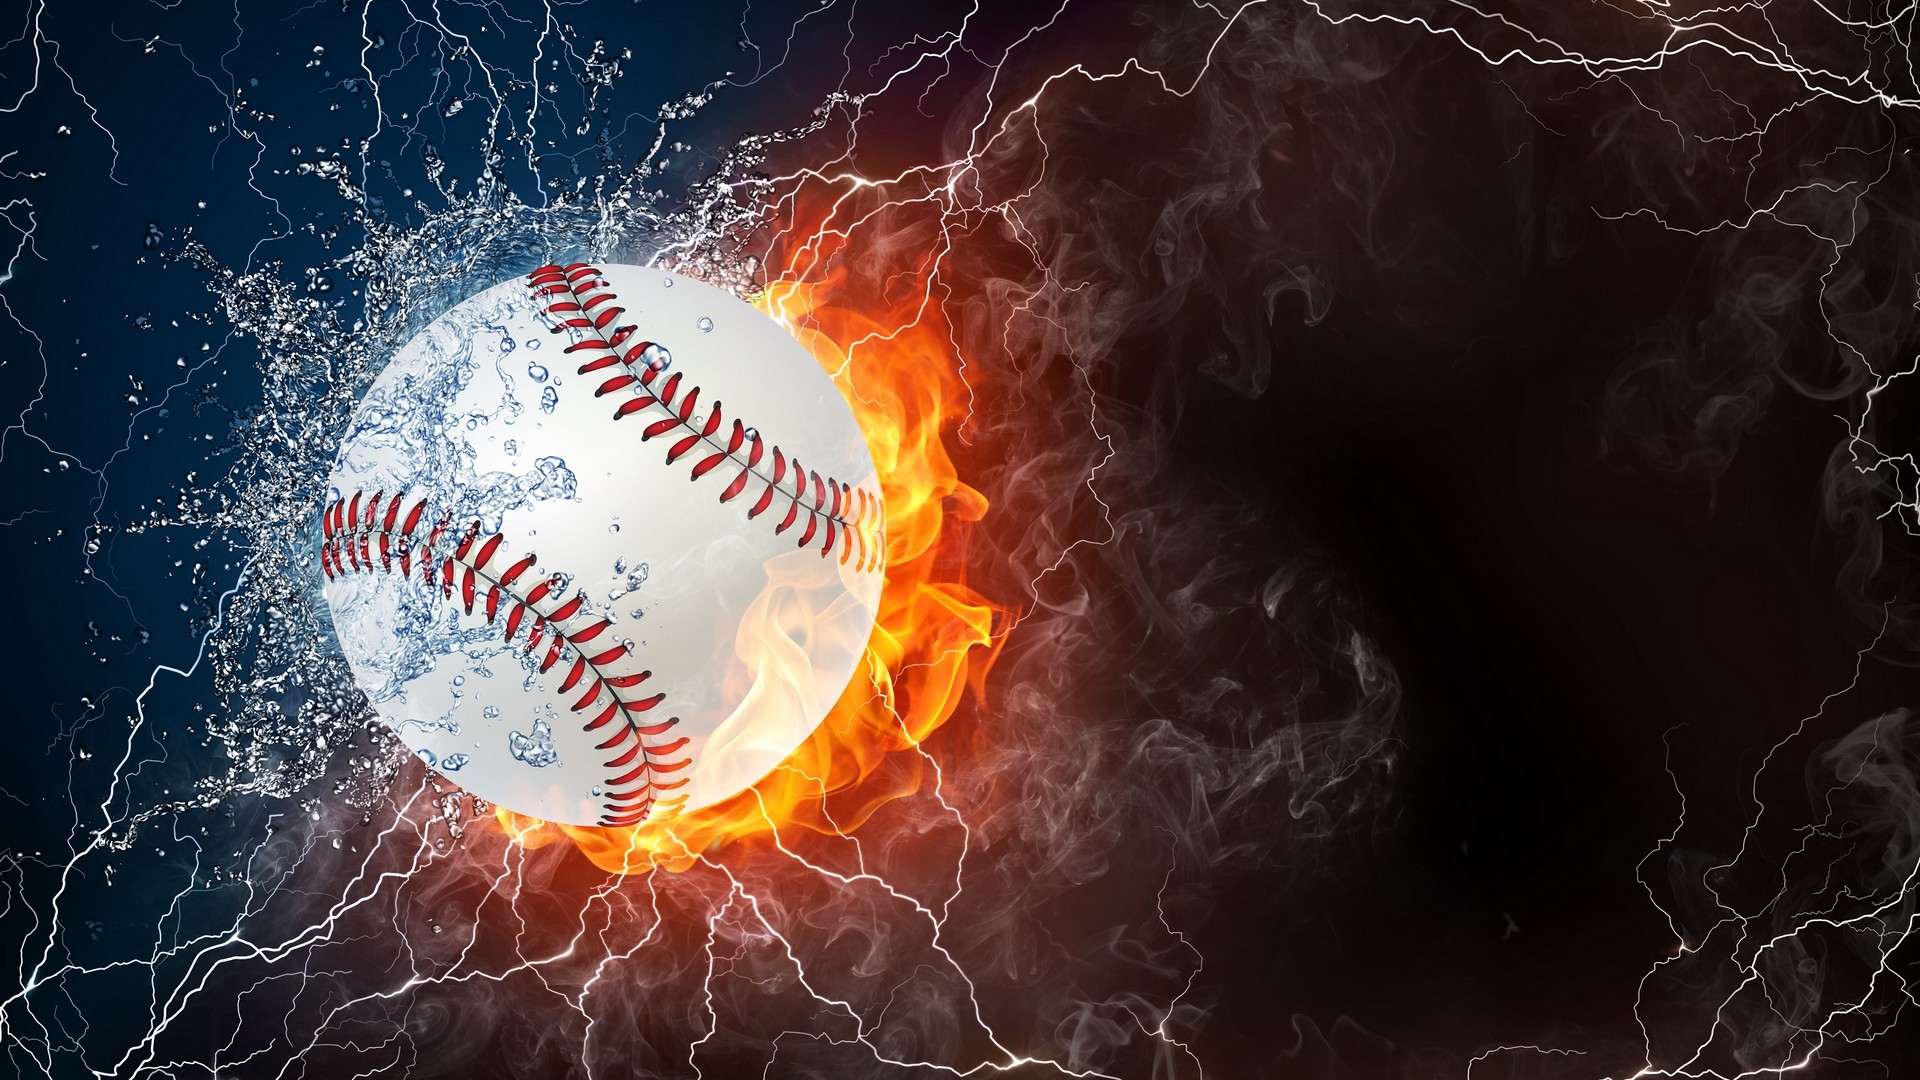 Cool Baseball For Desktop Wallpaper with high-resolution 1920x1080 pixel. You can use this wallpaper for Mac Desktop Wallpaper, Laptop Screensavers, Android Wallpapers, Tablet or iPhone Home Screen and another mobile phone device